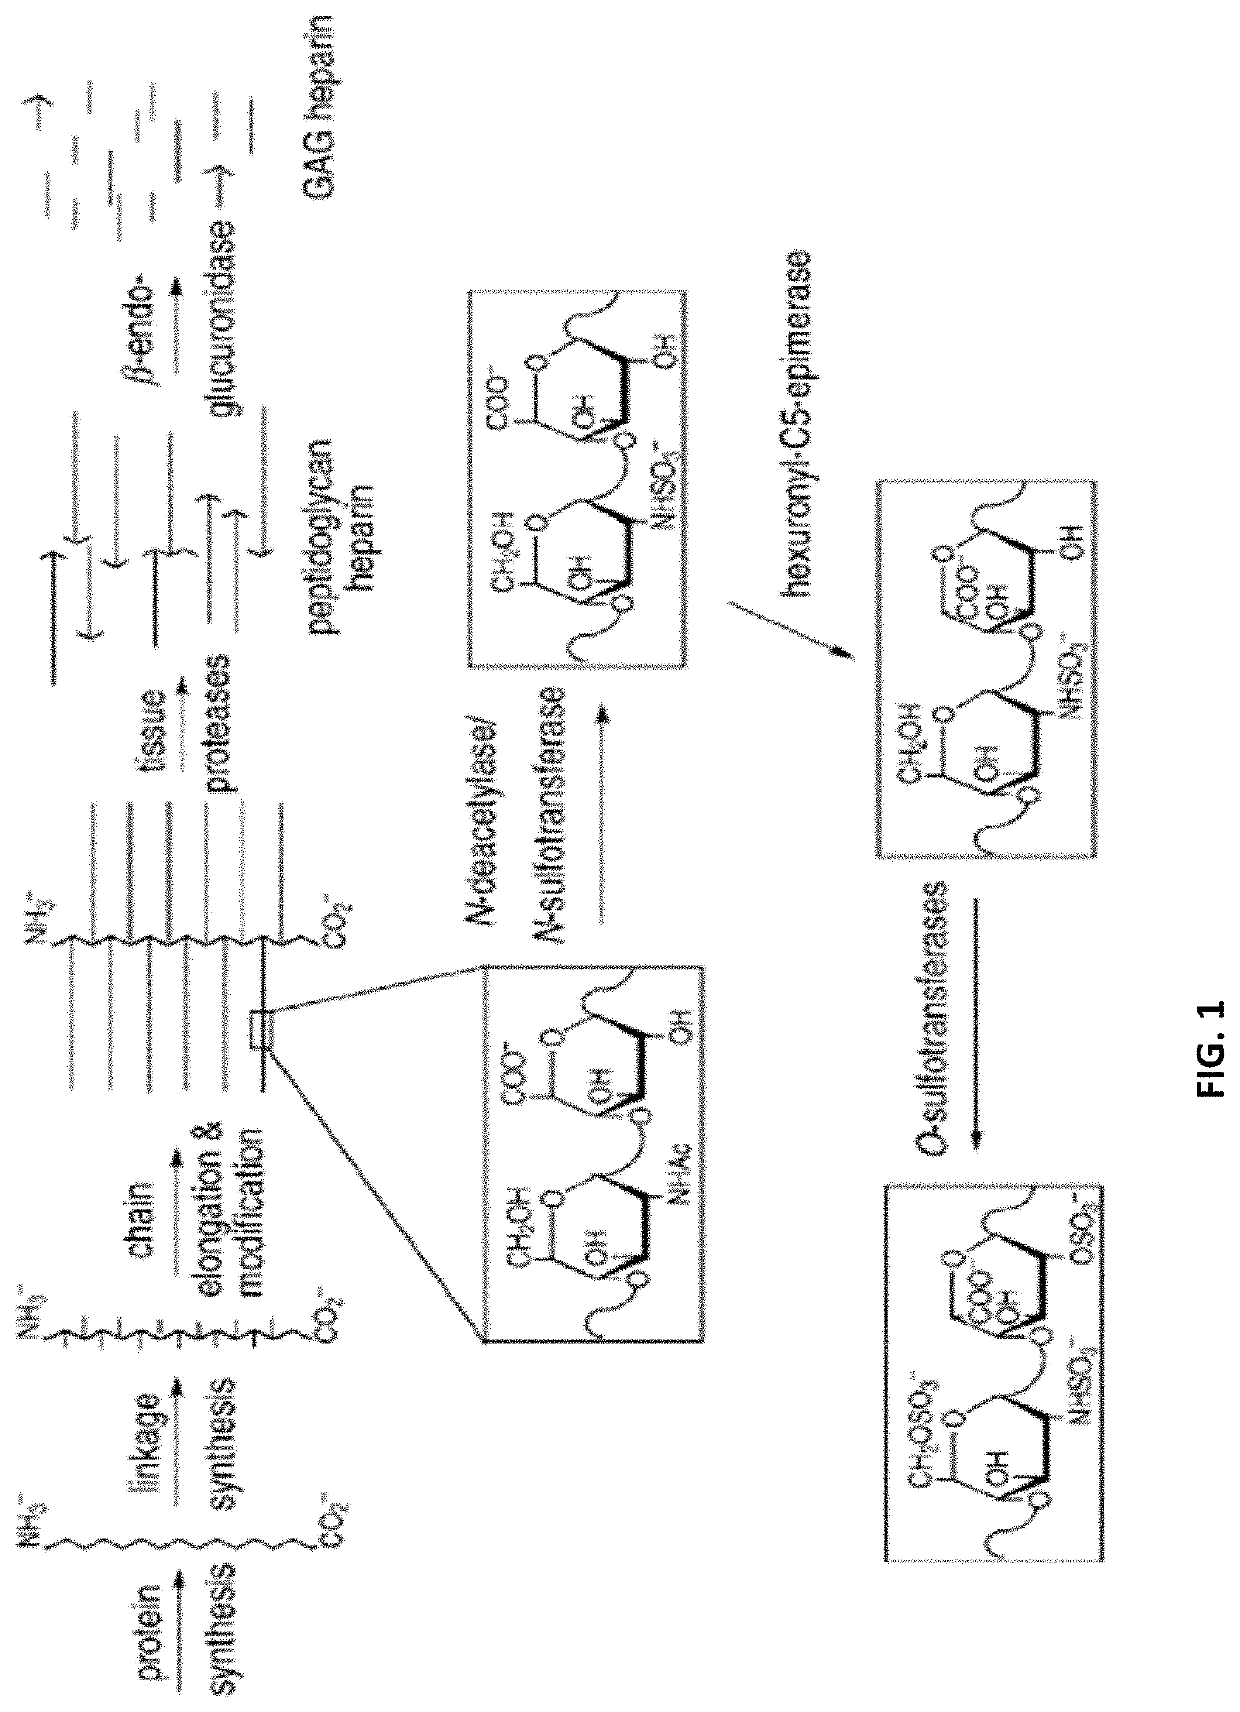 Method for the Analysis of Glycosaminoglycans, and Their Derivatives and Salts by Nuclear Magnetic Resonance